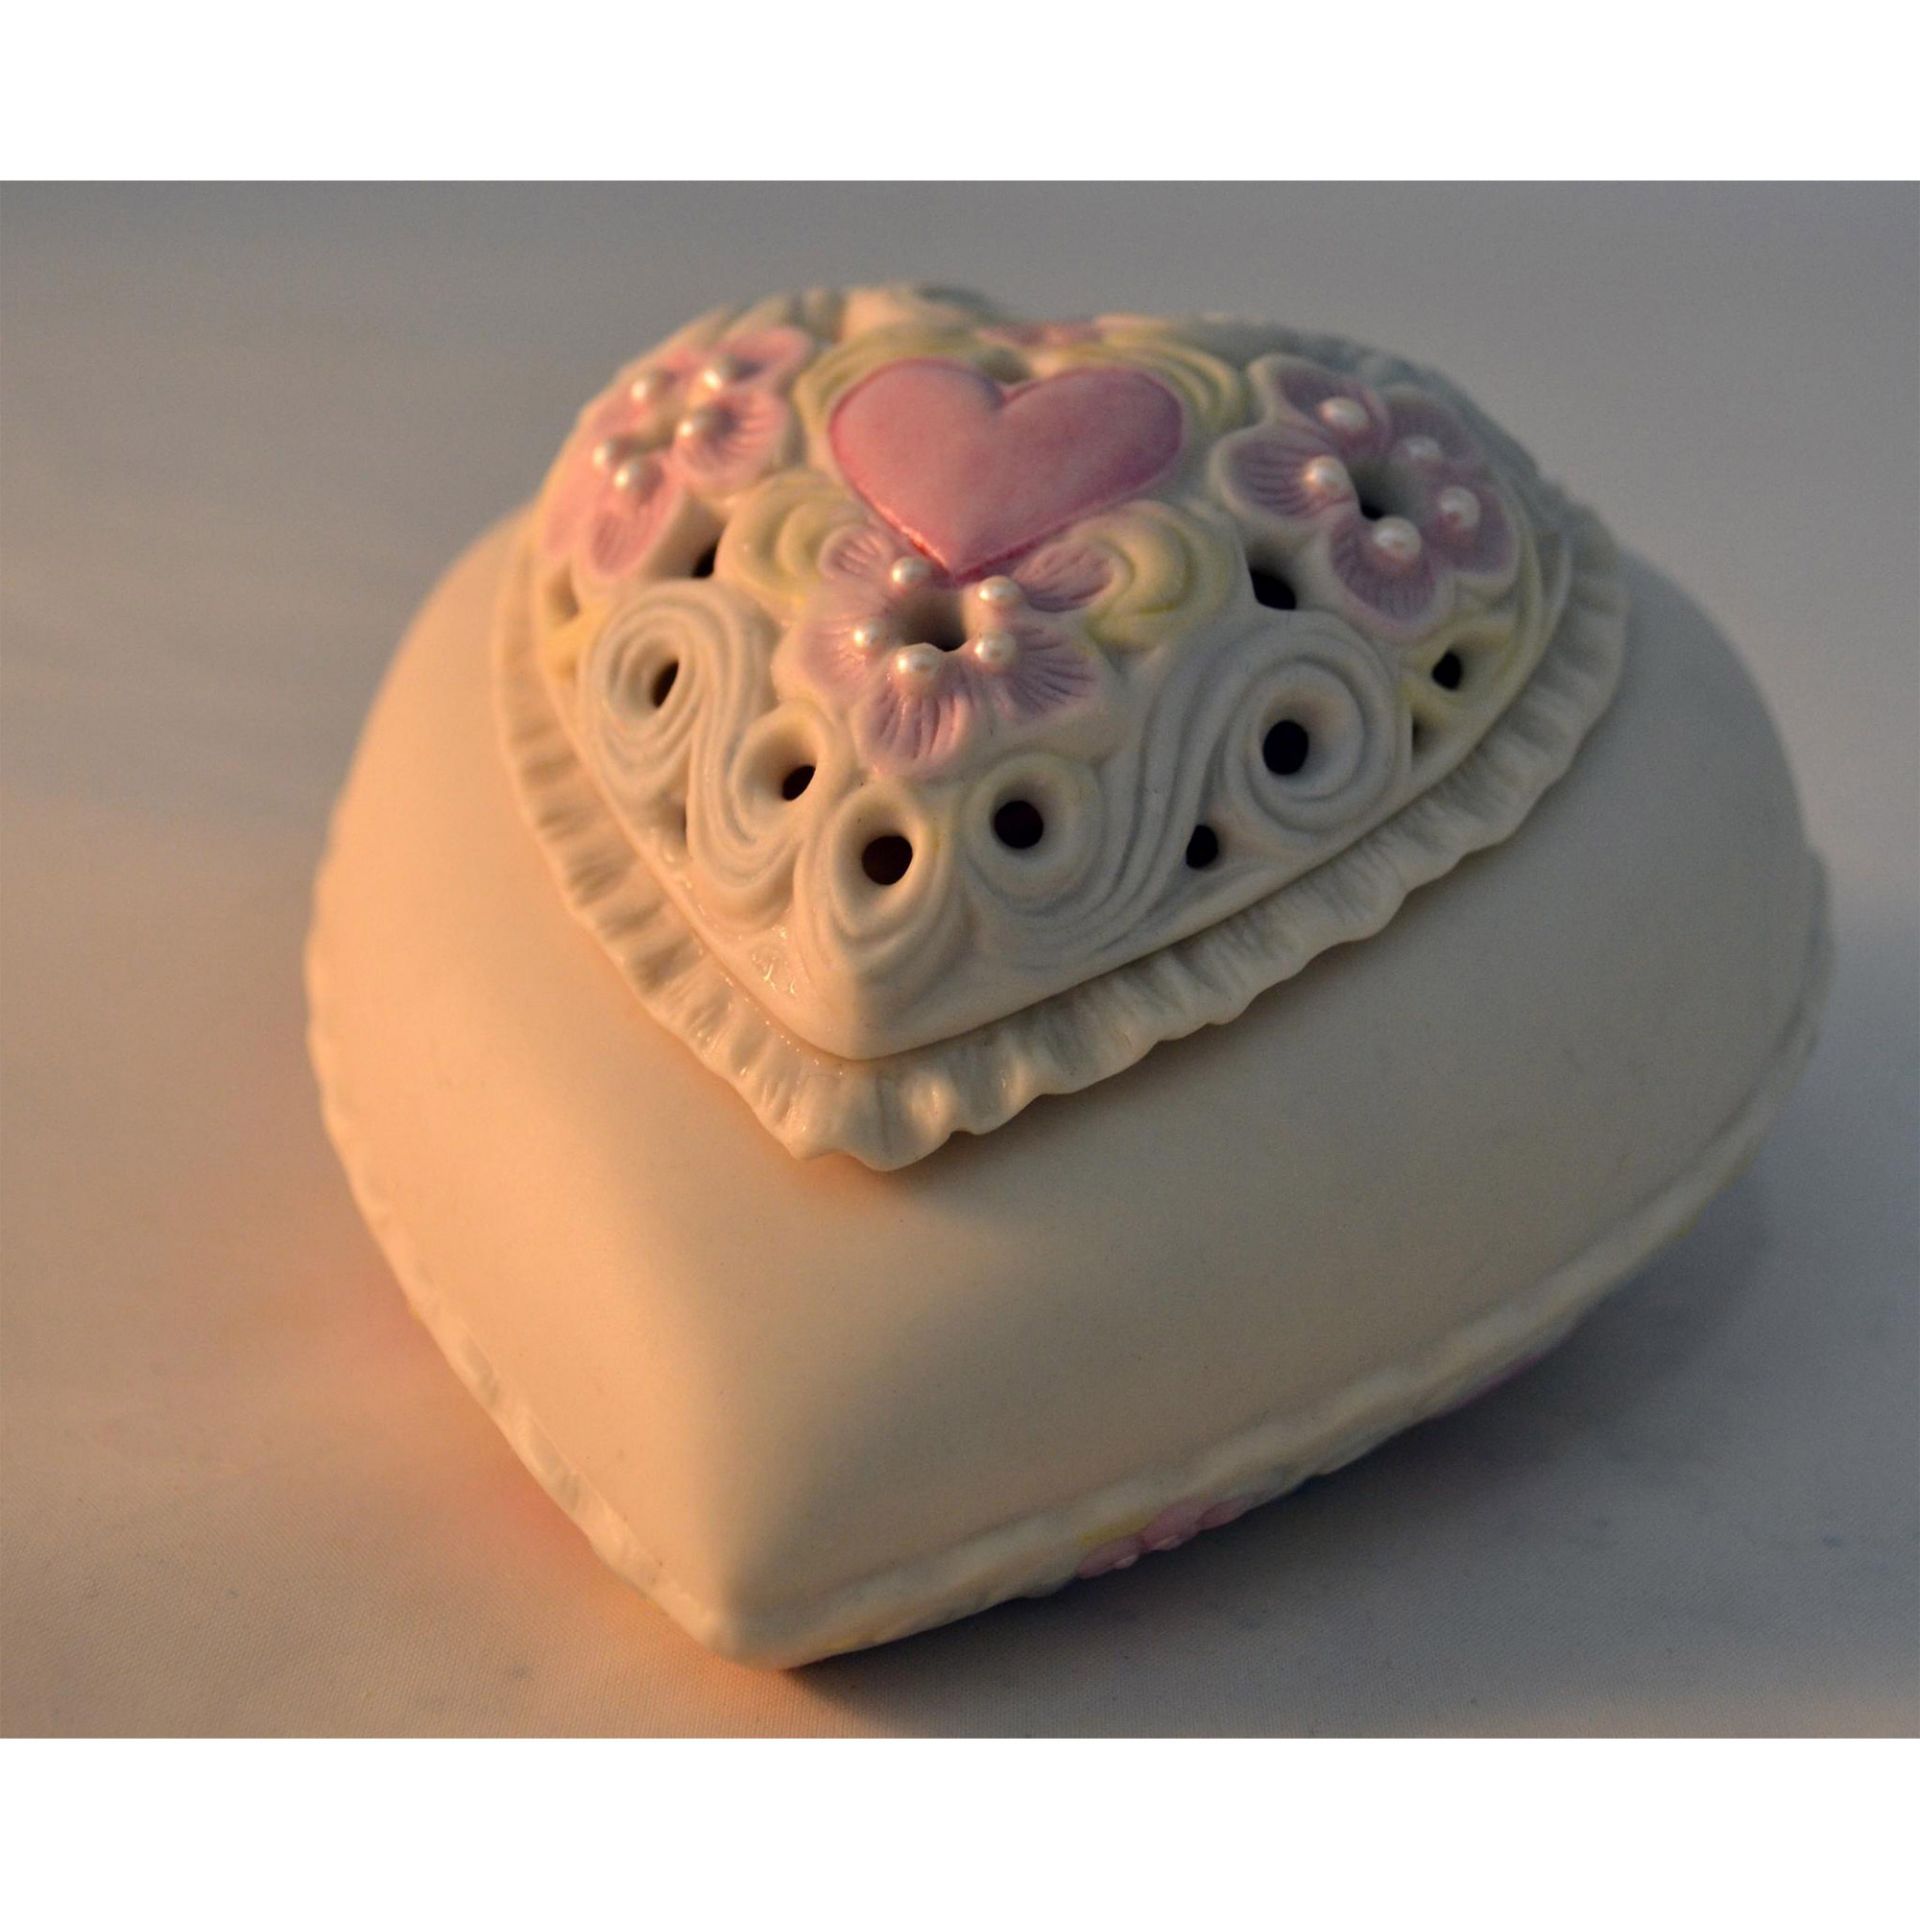 Cybis Porcelain Pastel Lidded Heart Box, Thinking Of You - Image 2 of 6